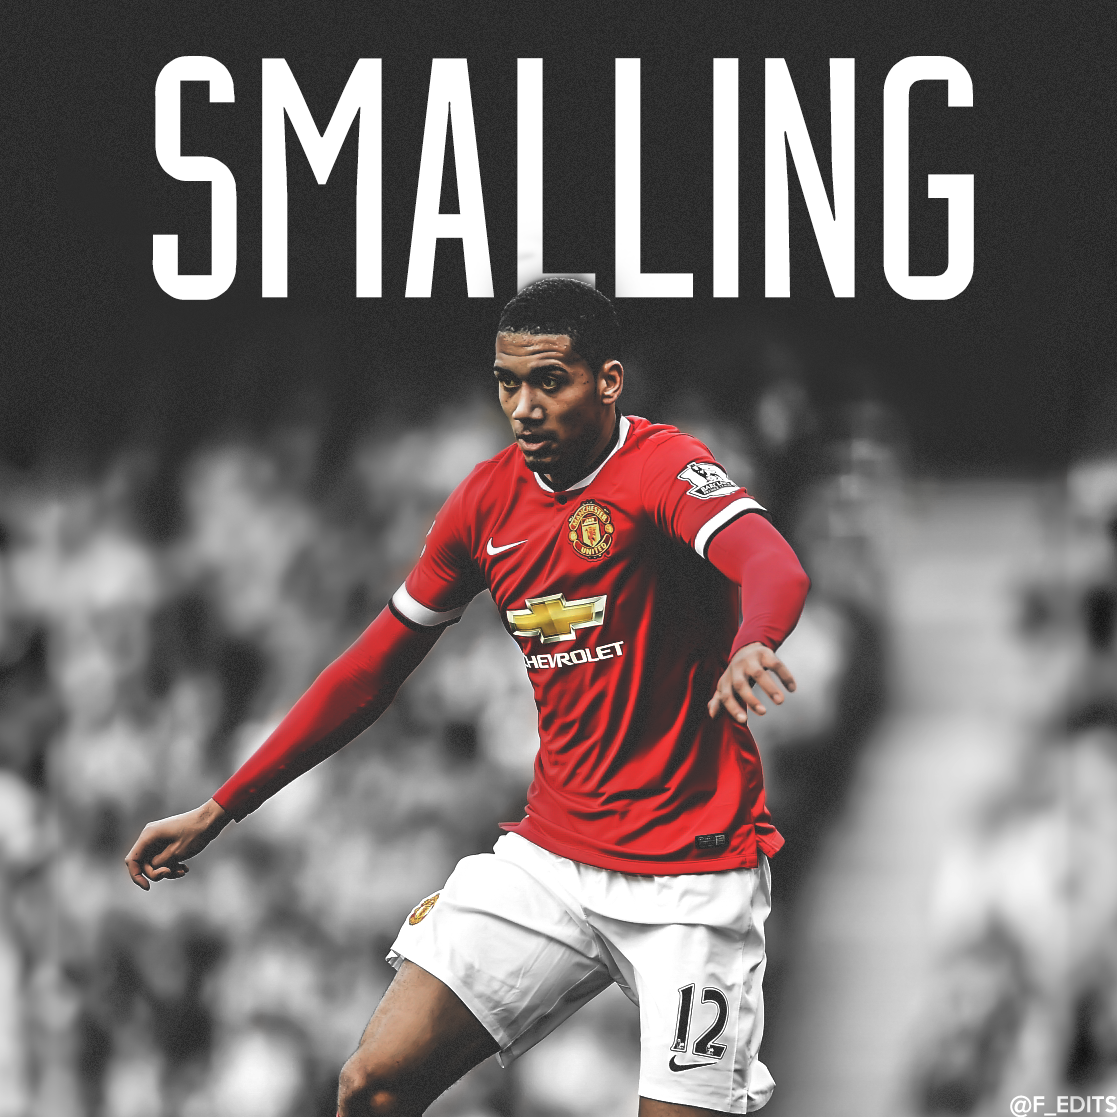 Fredrik Smalling. #MUFC. iPhone wallpaper and icon // ChrisSmalling's are very appreciated!!